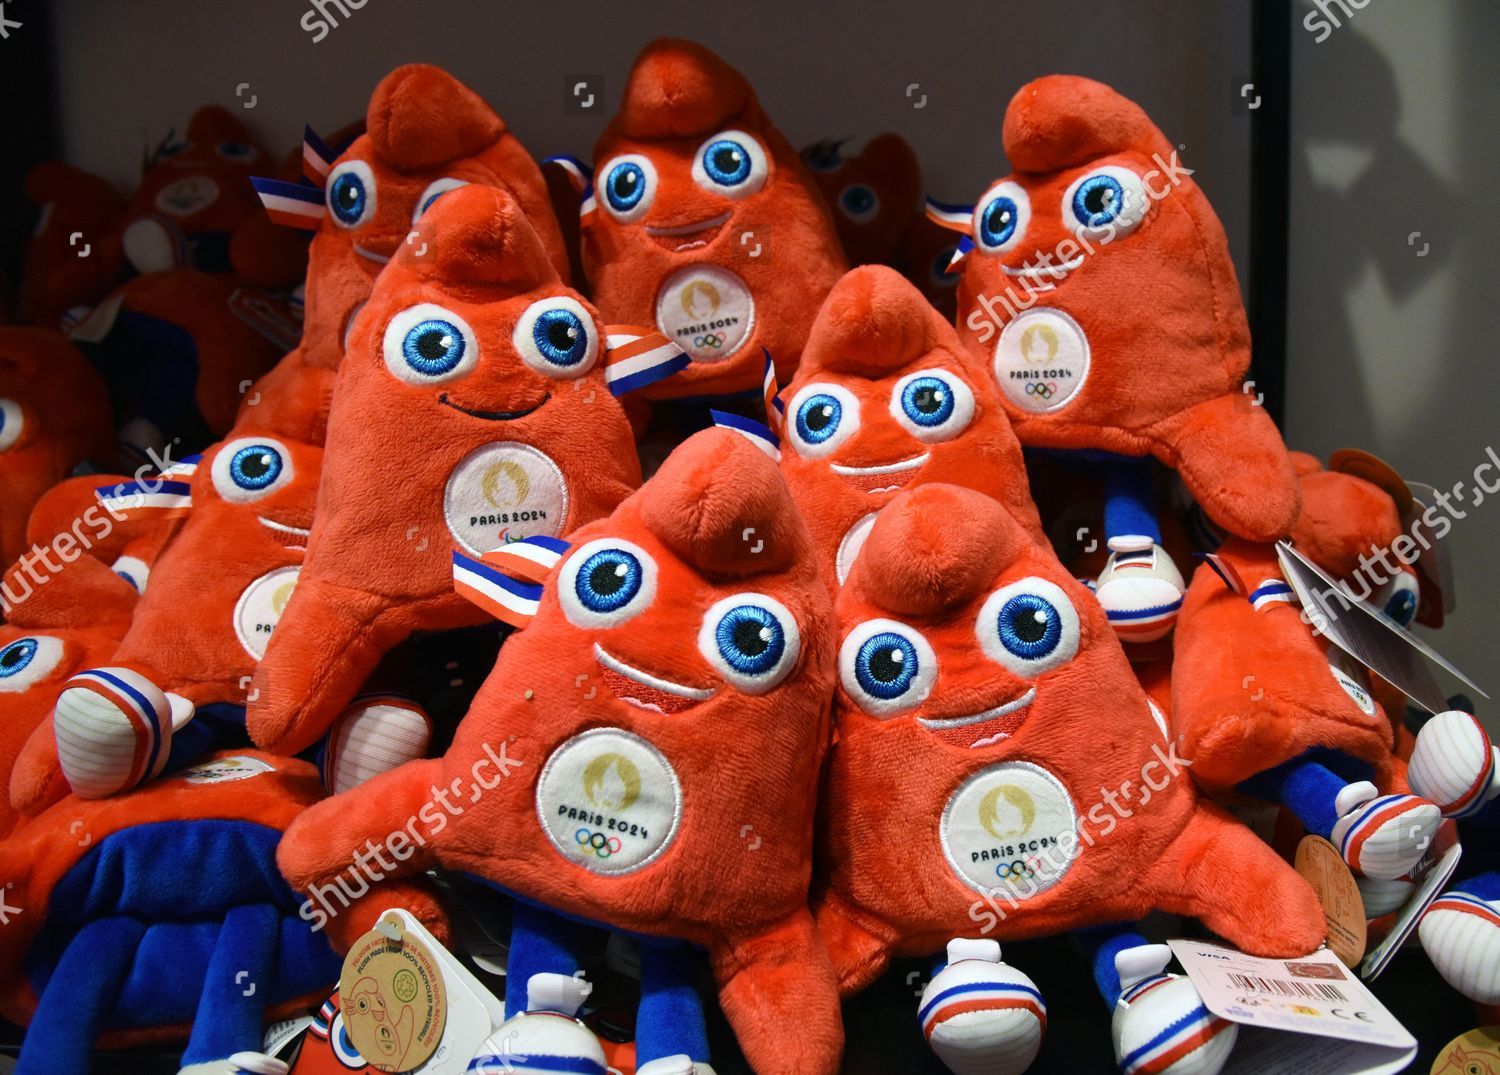 The Paralympic Phryges plush toy mascots for the Paris 2024